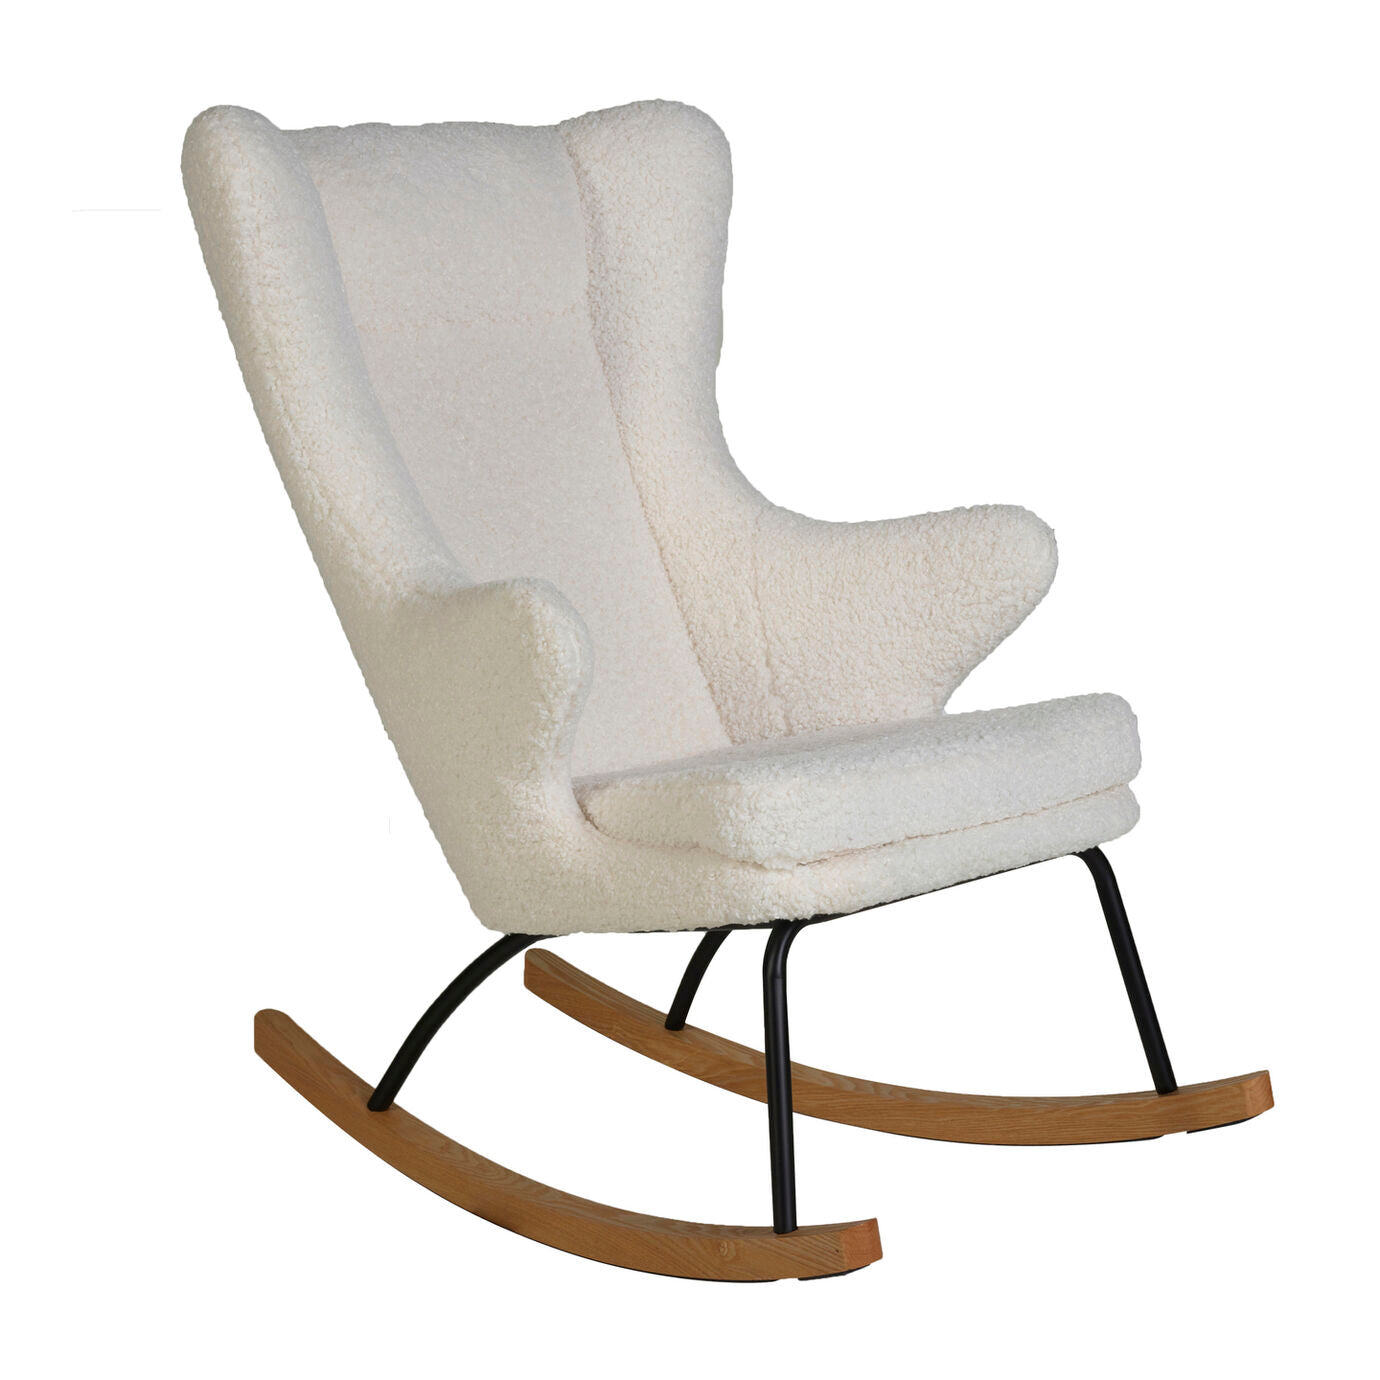 Quax- Rocking Adult Chair De Luxe- Limited Edition